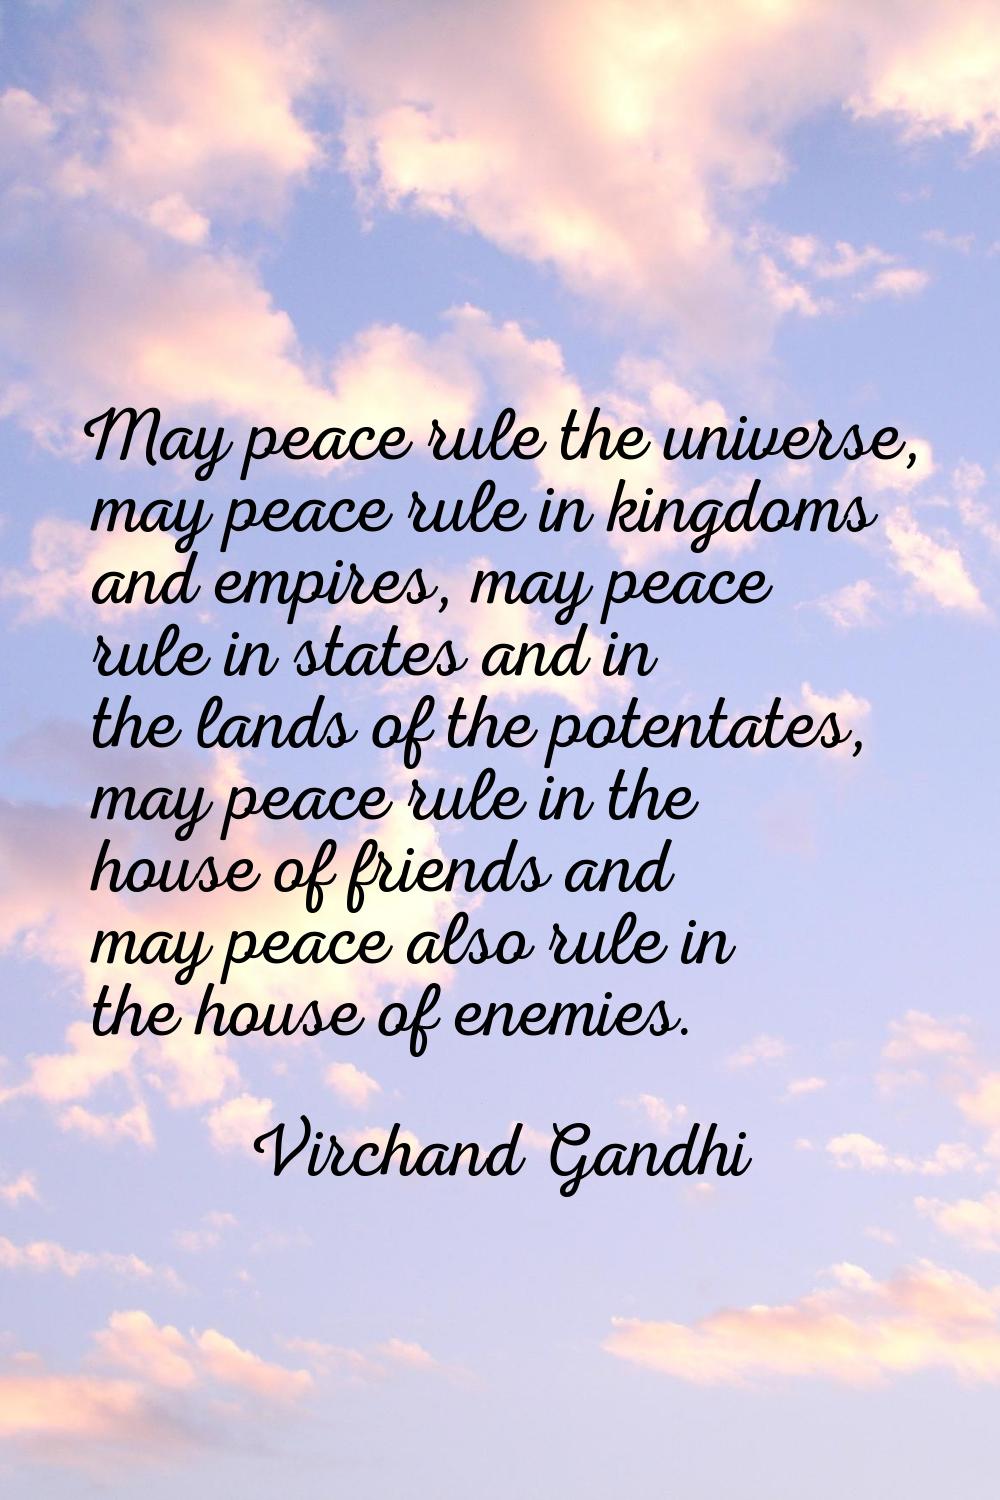 May peace rule the universe, may peace rule in kingdoms and empires, may peace rule in states and i